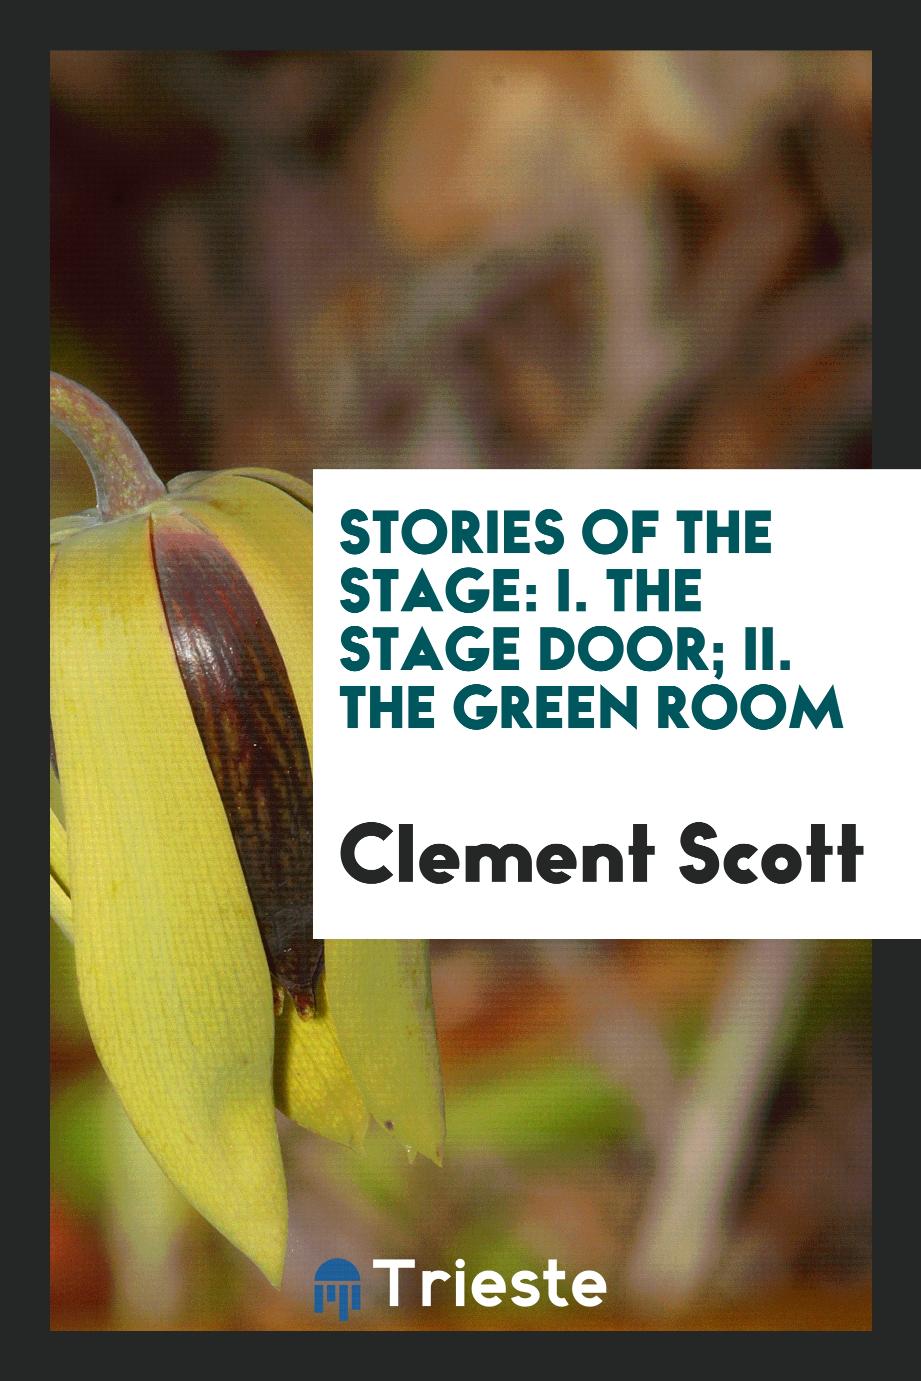 Stories of the stage: I. the stage door; II. the green room